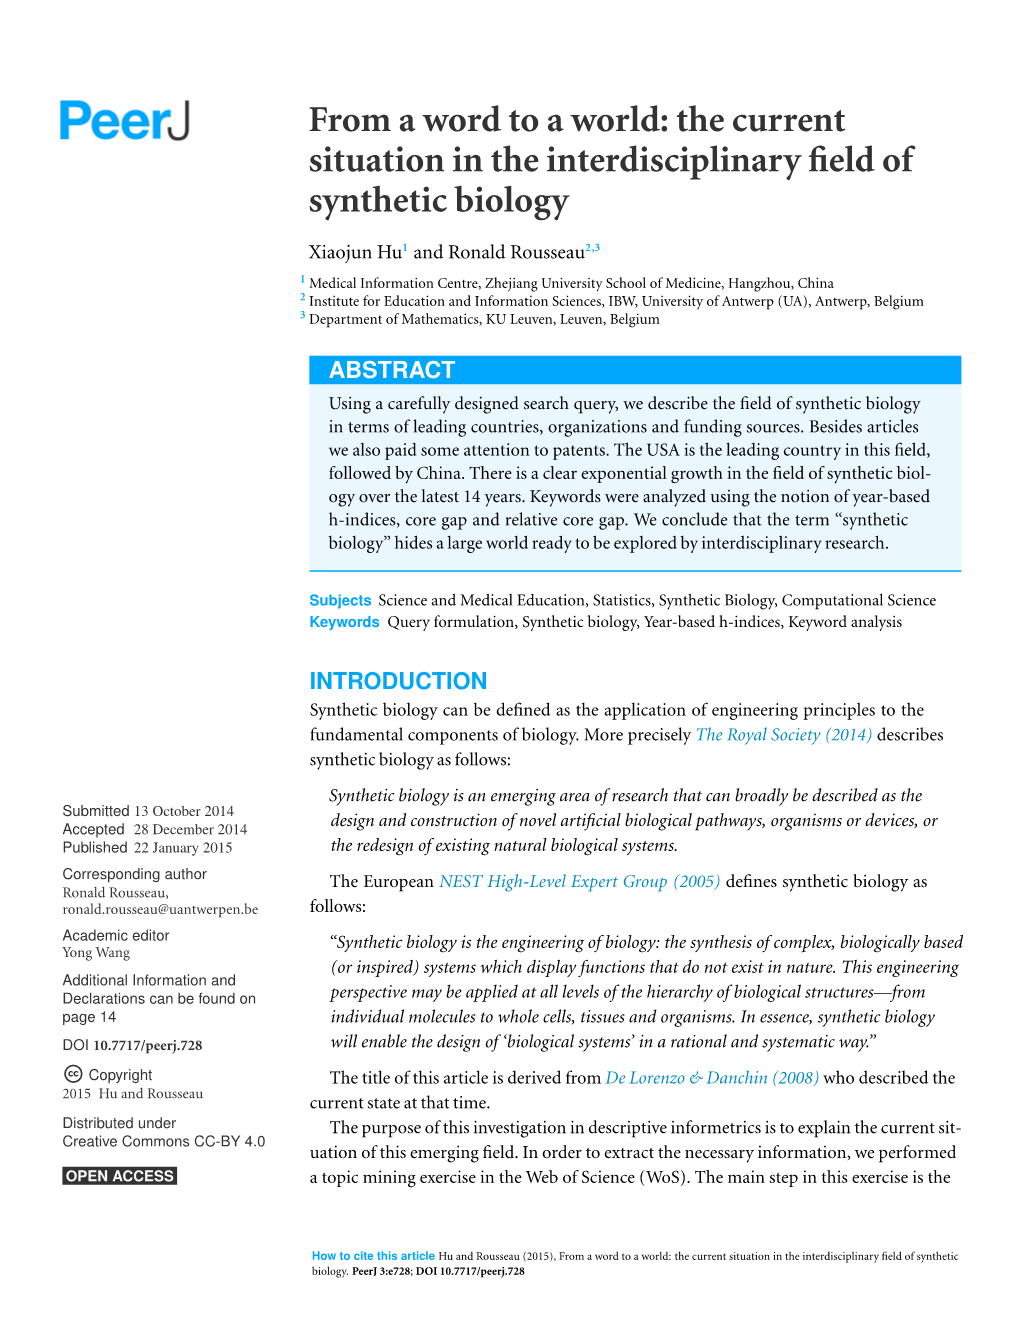 The Current Situation in the Interdisciplinary Field of Synthetic Biology